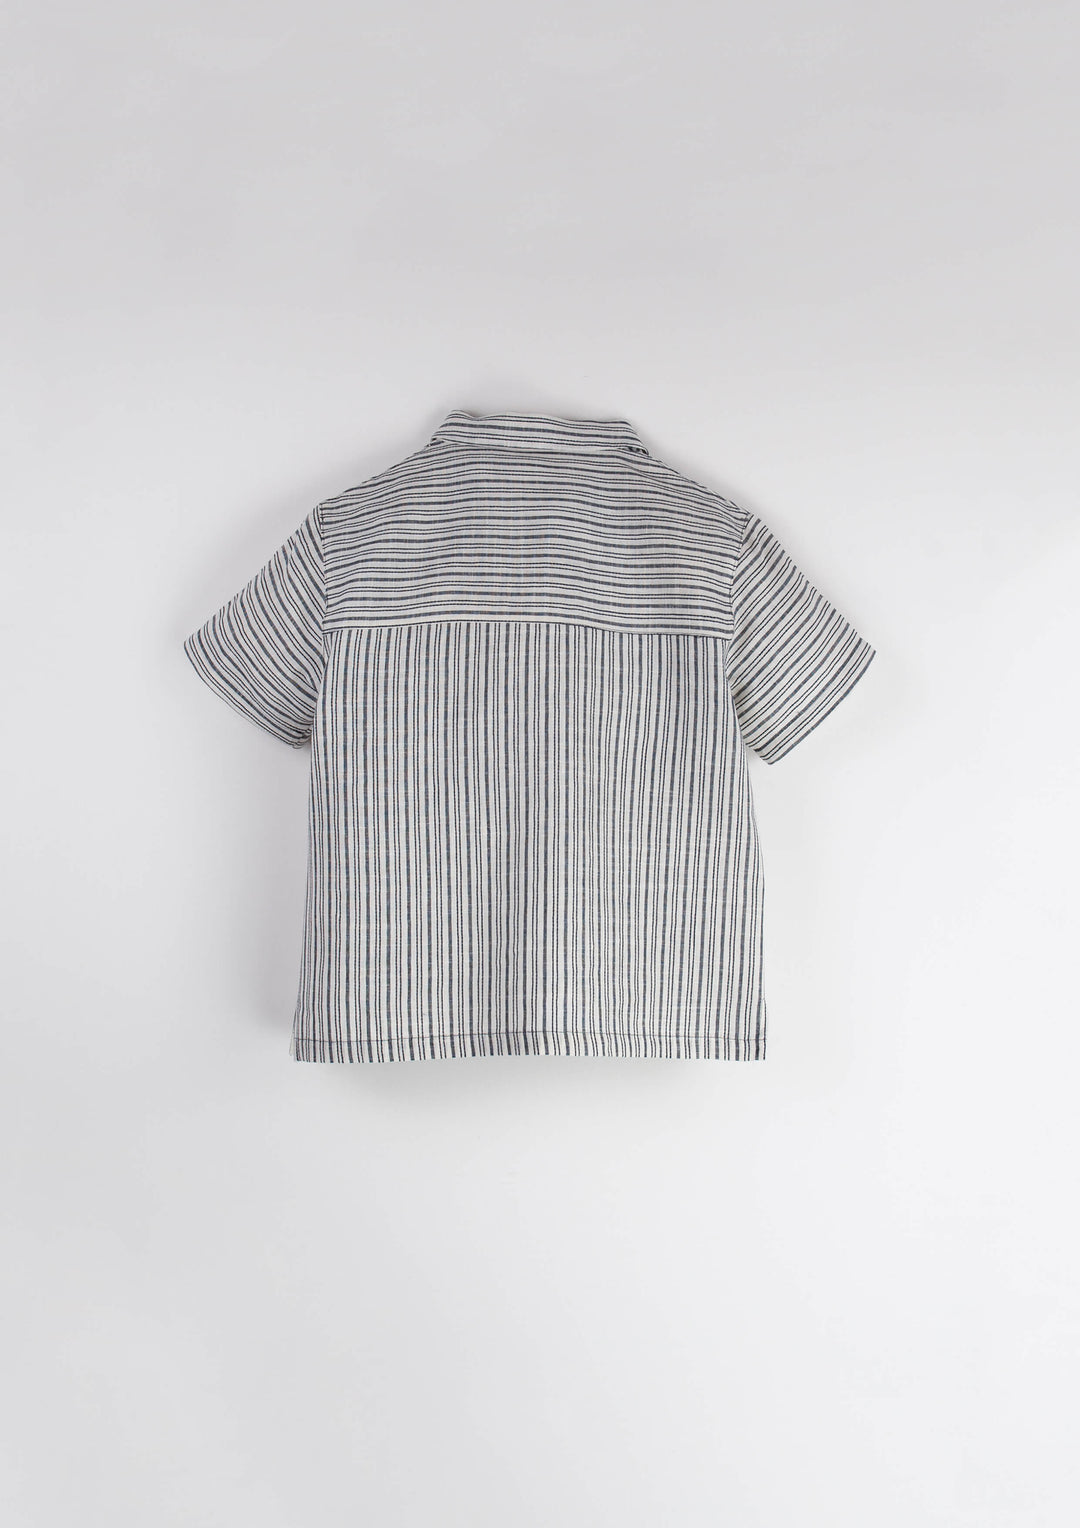 Mod.25.3 Embroidered striped contrasting shirt